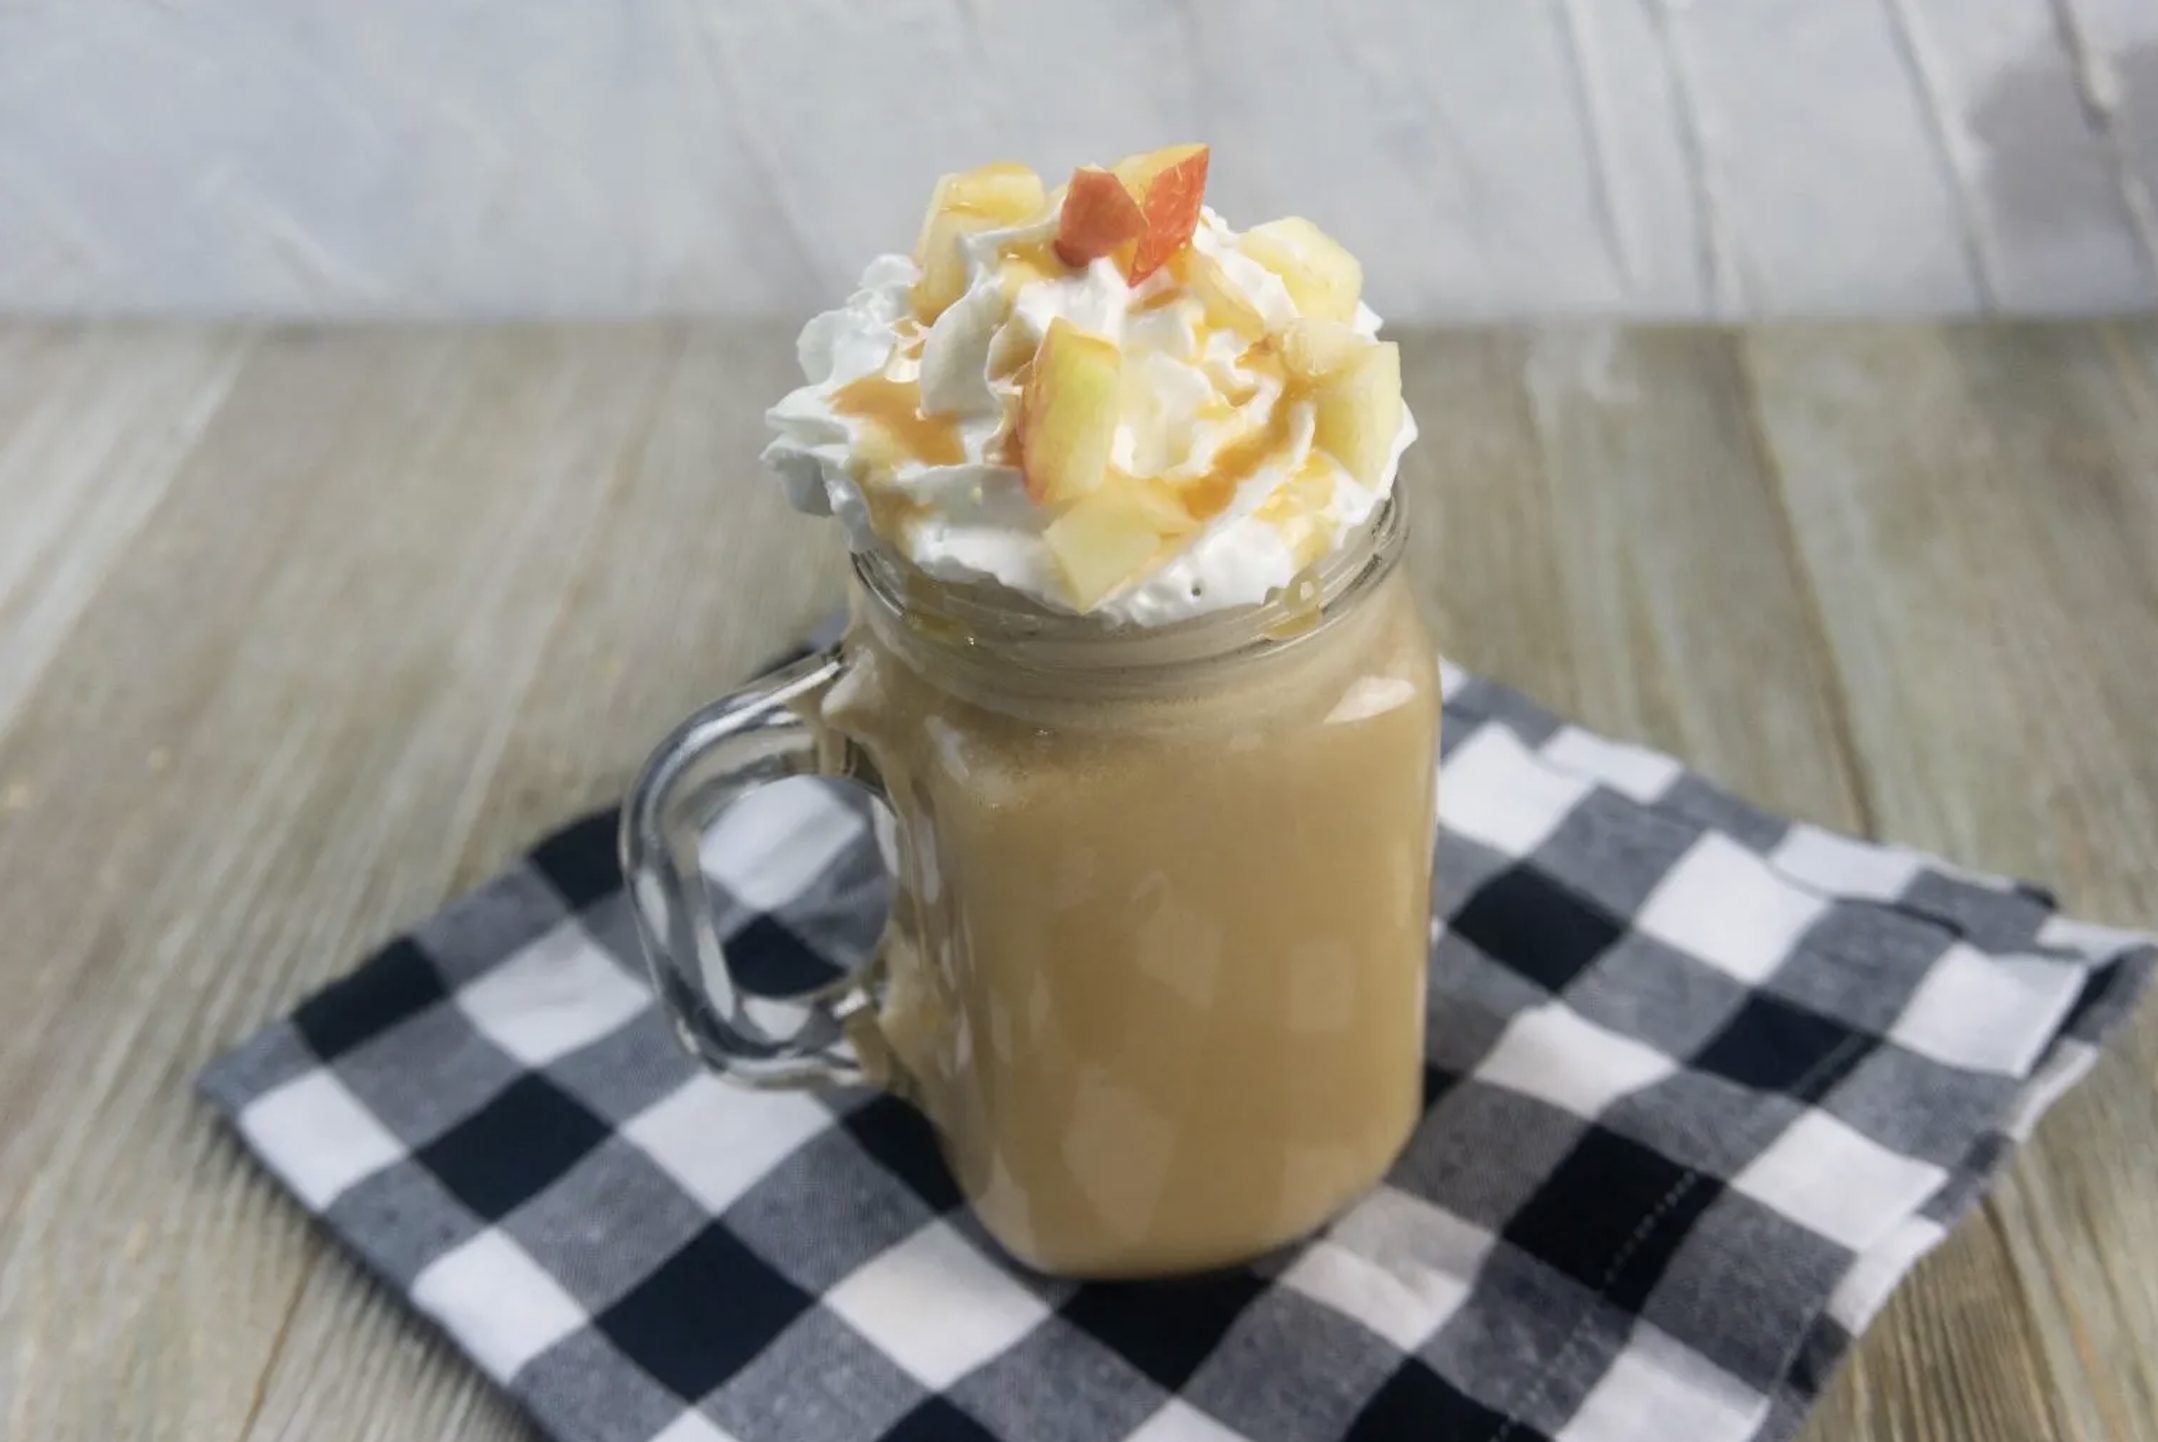 Carmel apples are a quintessential autumn combo. Enjoy this flavor in your coffee with this delicious recipe.<p><b><a href="https://masonjarrecipe.com/caramel-apple-latte-mason-jars/">Get recipe</a></b></p> <h1>More from MediaFeed:</h1> <ul><li><b><a href="https://www.msn.com/en-us/news/other/11-ways-that-millionaires-think-differently-than-the-rest-of-us/ss-AAZOIeV">11 ways that millionaires think differently than the rest of us</a></b></li>   <li><b><a href="https://www.msn.com/en-us/news/other/foods-that-americans-really-loathe/ss-BB1fJhT8">Foods that Americans really loathe</a></b></li>   <li><b><a href="https://www.msn.com/en-us/news/other/unsettling-facts-about-retirement-in-america/ss-AAUYvYm">Unsettling facts about retirement in America</a></b></li>   <li><b><a href="https://www.msn.com/en-us/money/realestate/the-most-crime-ridden-cities-in-the-us/s s-AAZN9H7">The most crime-ridden cities in the US</a></b></li></ul> <h2>Like MediaFeed's content? <a href="https://www.msn.com/en-us/community/channel/vid-ckv6hf6hjif65e0cjnm83s7yb2y0w5xmun0j4refire0ev6727is">Be sure to follow us.</a></h2> <p><i>This article was produced and syndicated by <a href="https://mediafeed.org">MediaFeed.org</a>.</i></p>